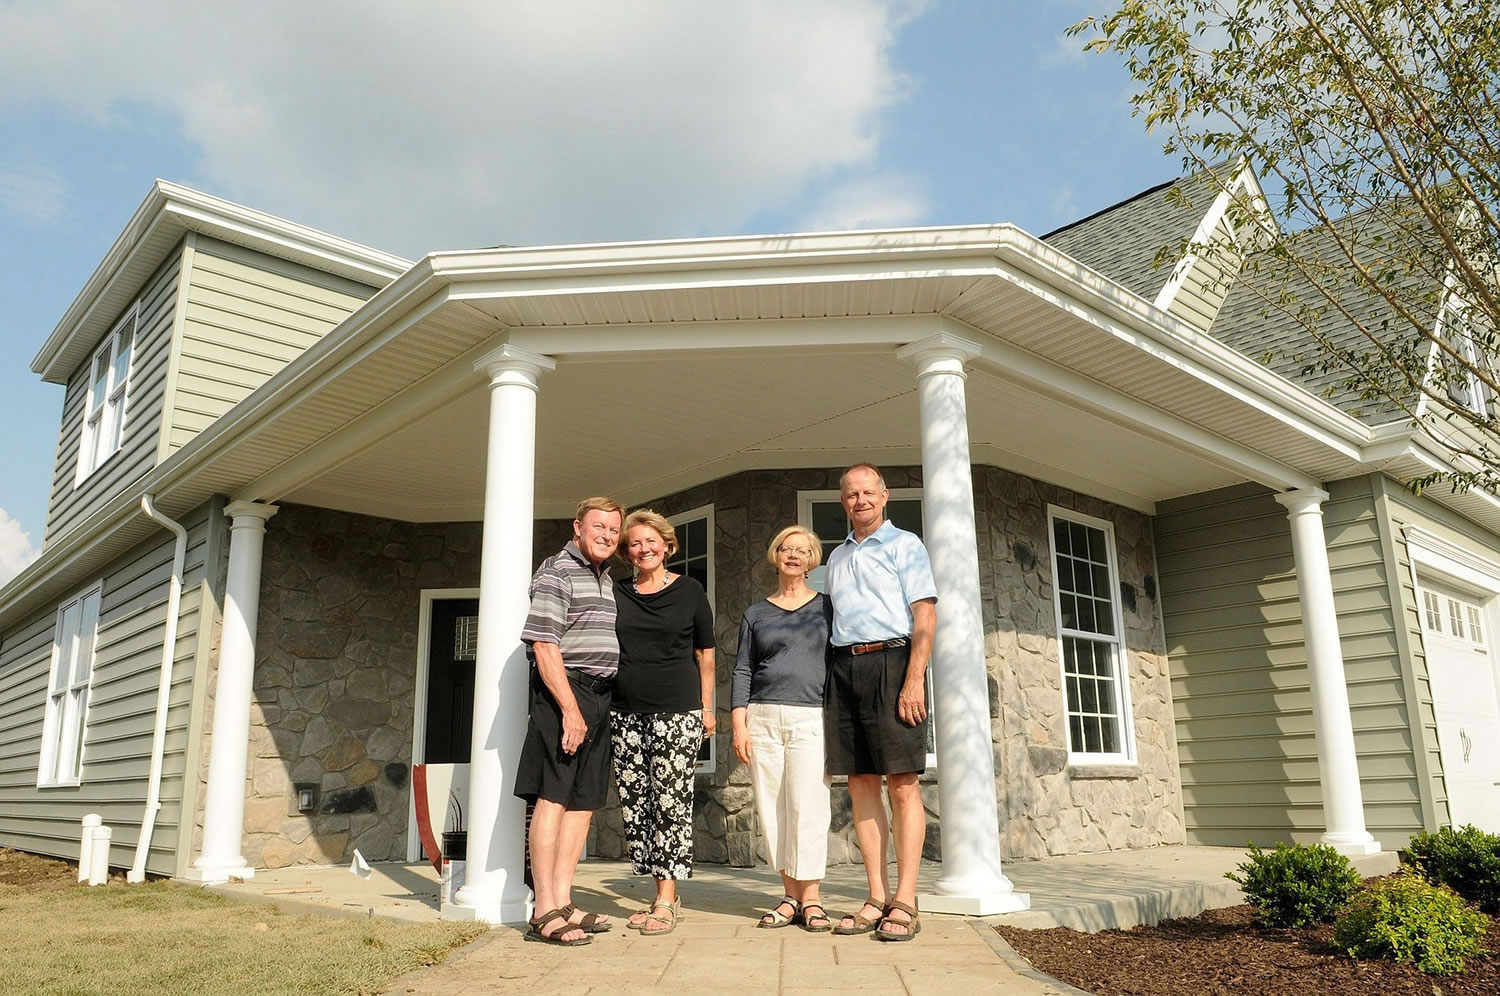 John and Judy Woffington, from left, join Rich and Kathy Jucha outside a model home in a Traditions of America housing development called Sewickley Ridge in Ohio Township, Pa., in June.